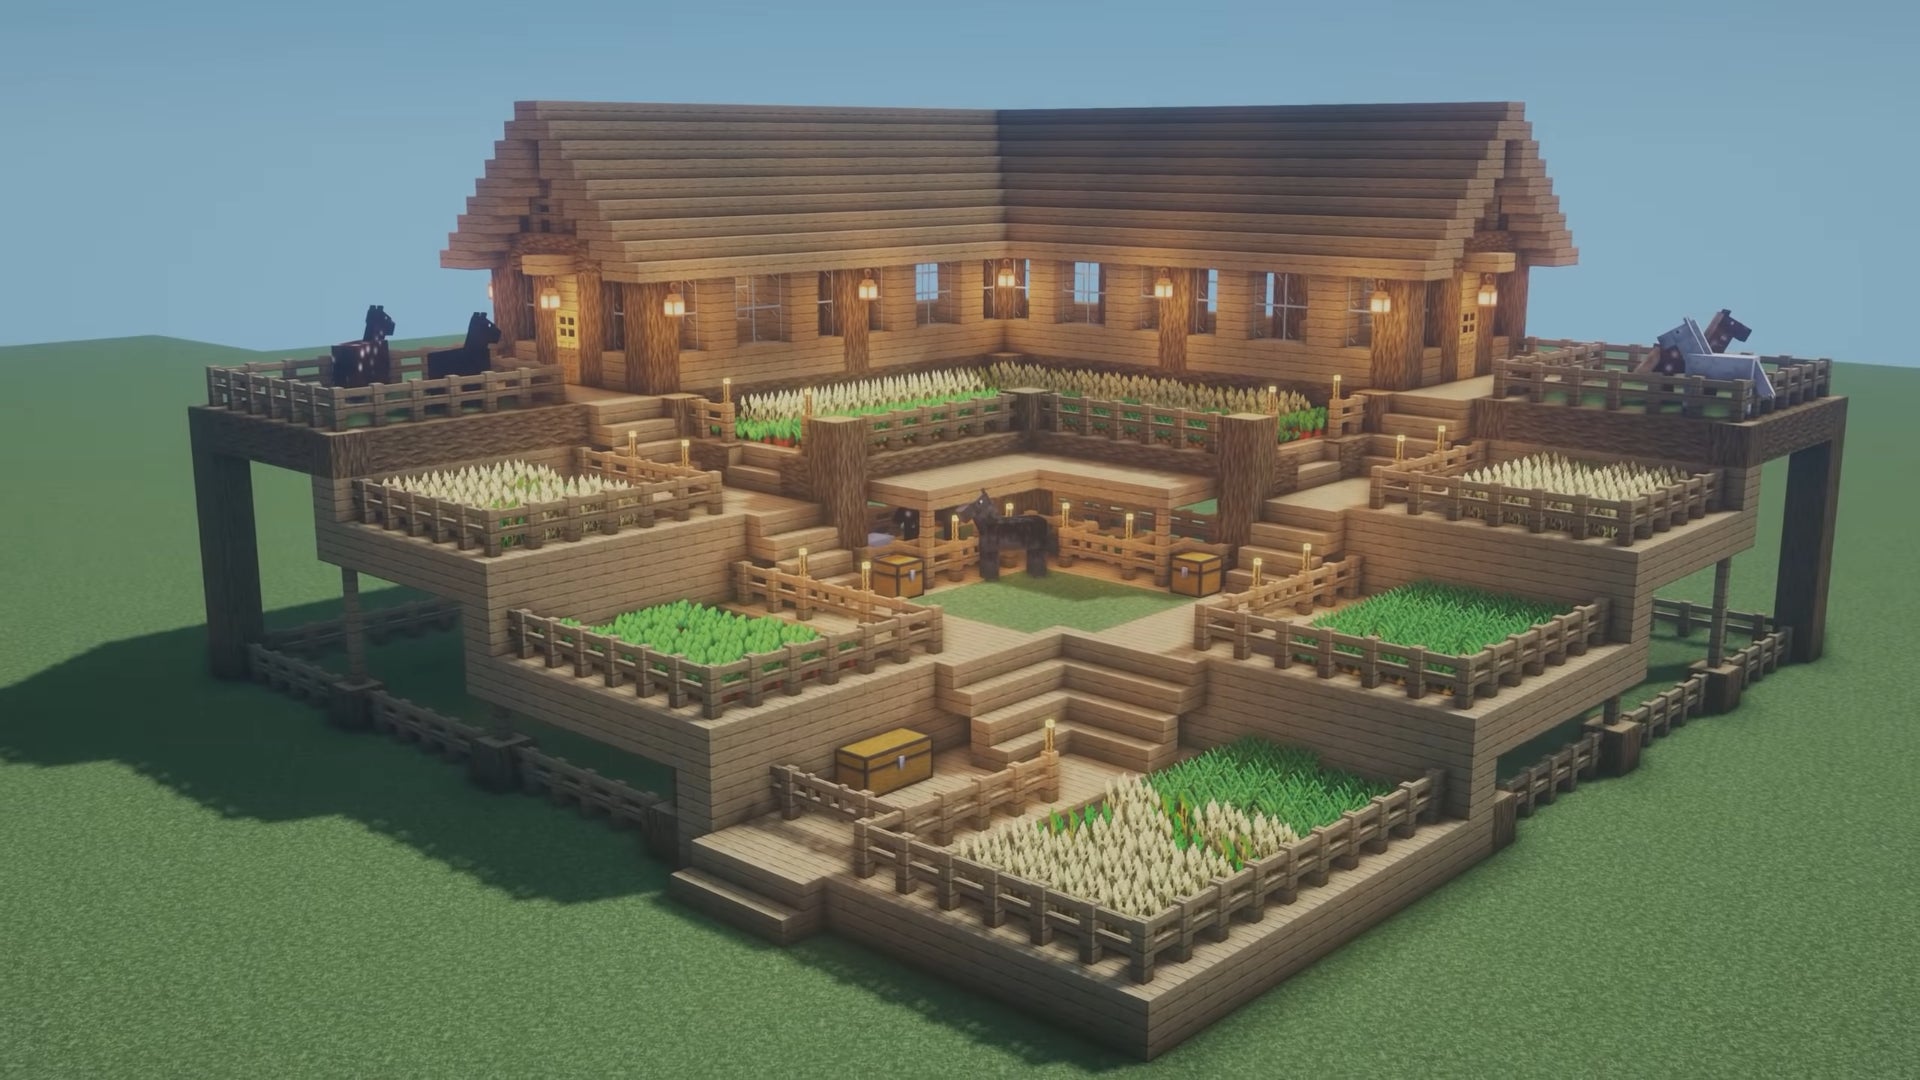 A wooden farmhouse in Minecraft, built by YouTuber "JUNS MAB Architecture tutorial".